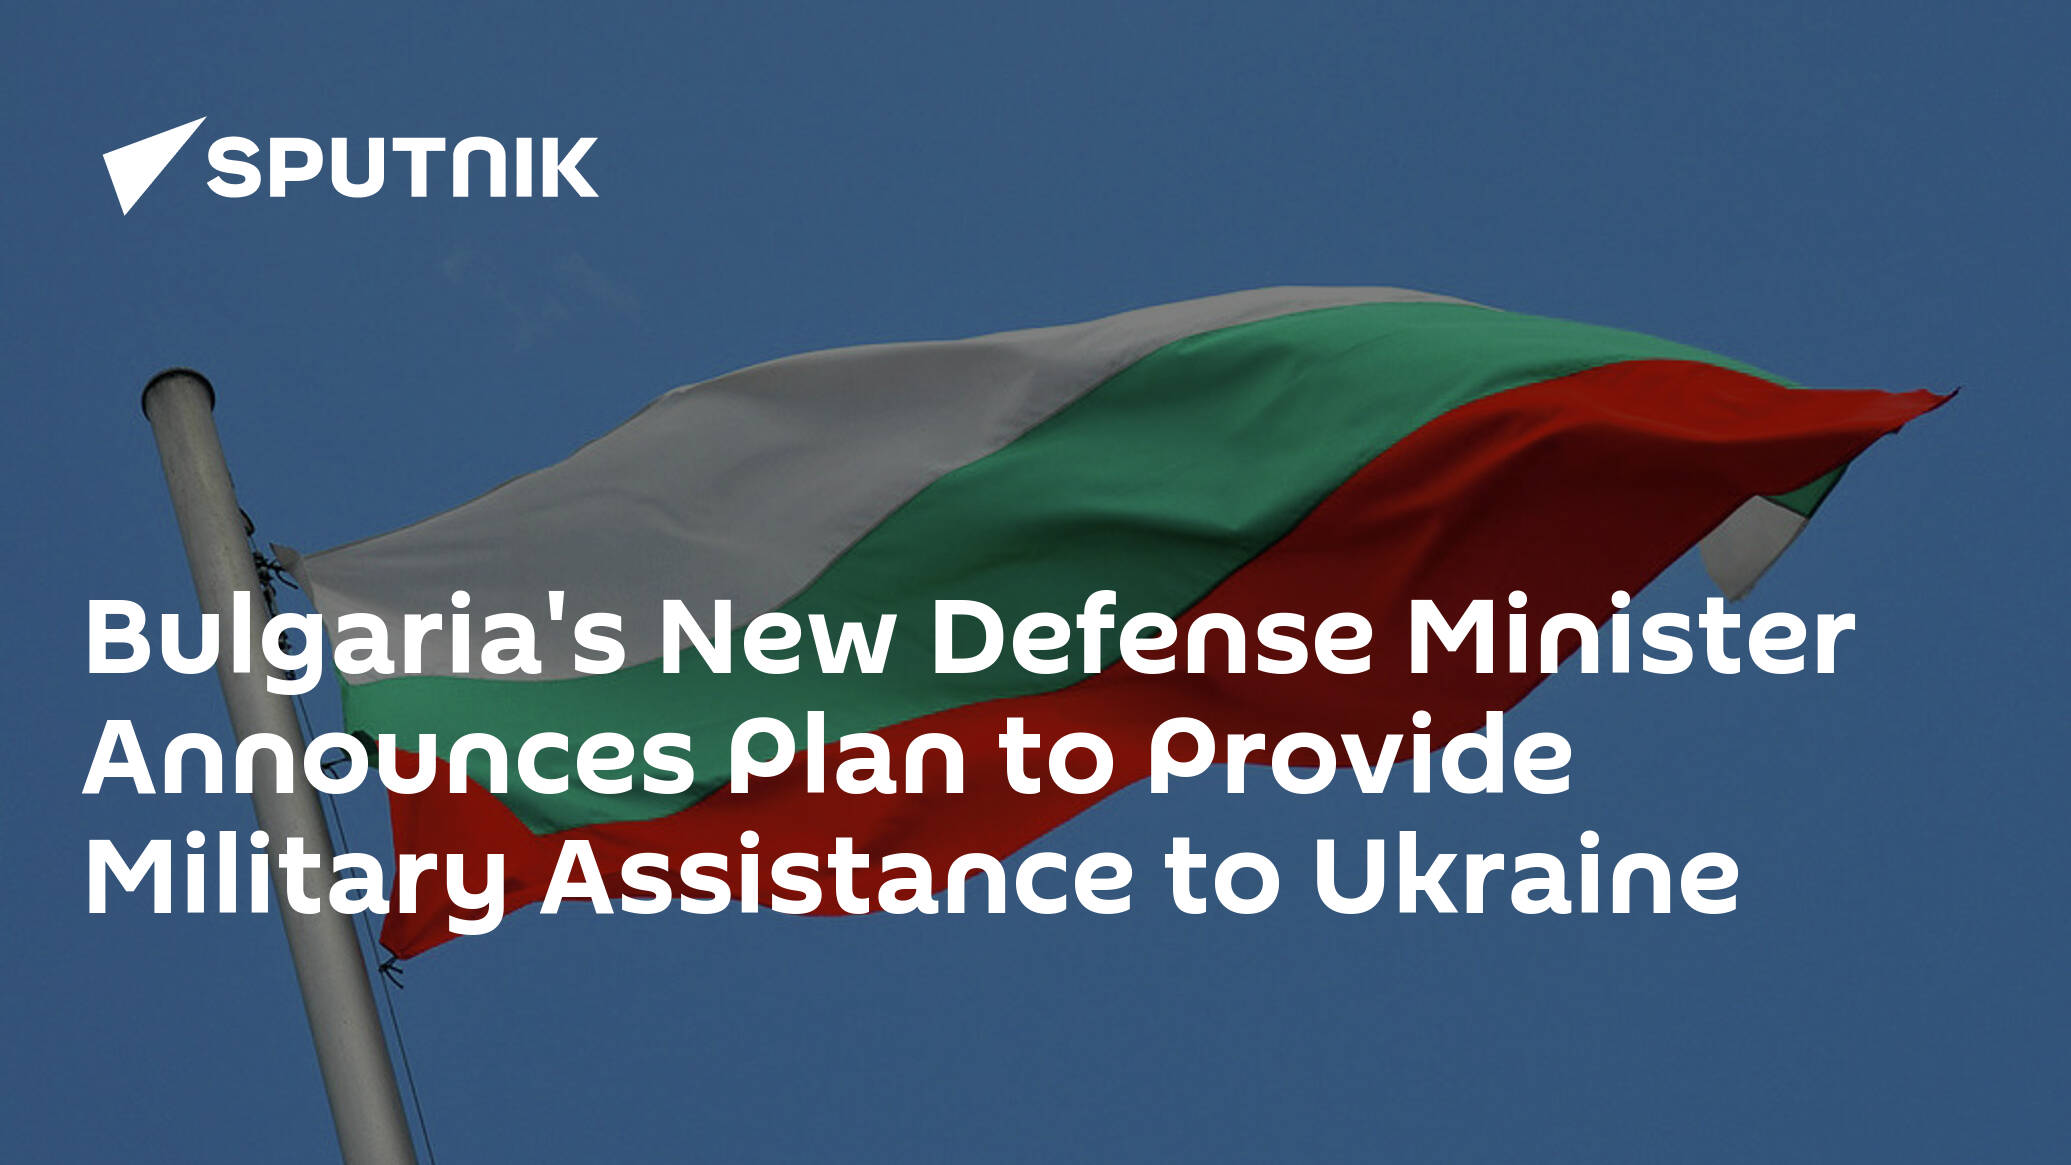 Bulgaria's New Defense Minister Announces Plan to Provide Military Assistance to Ukraine